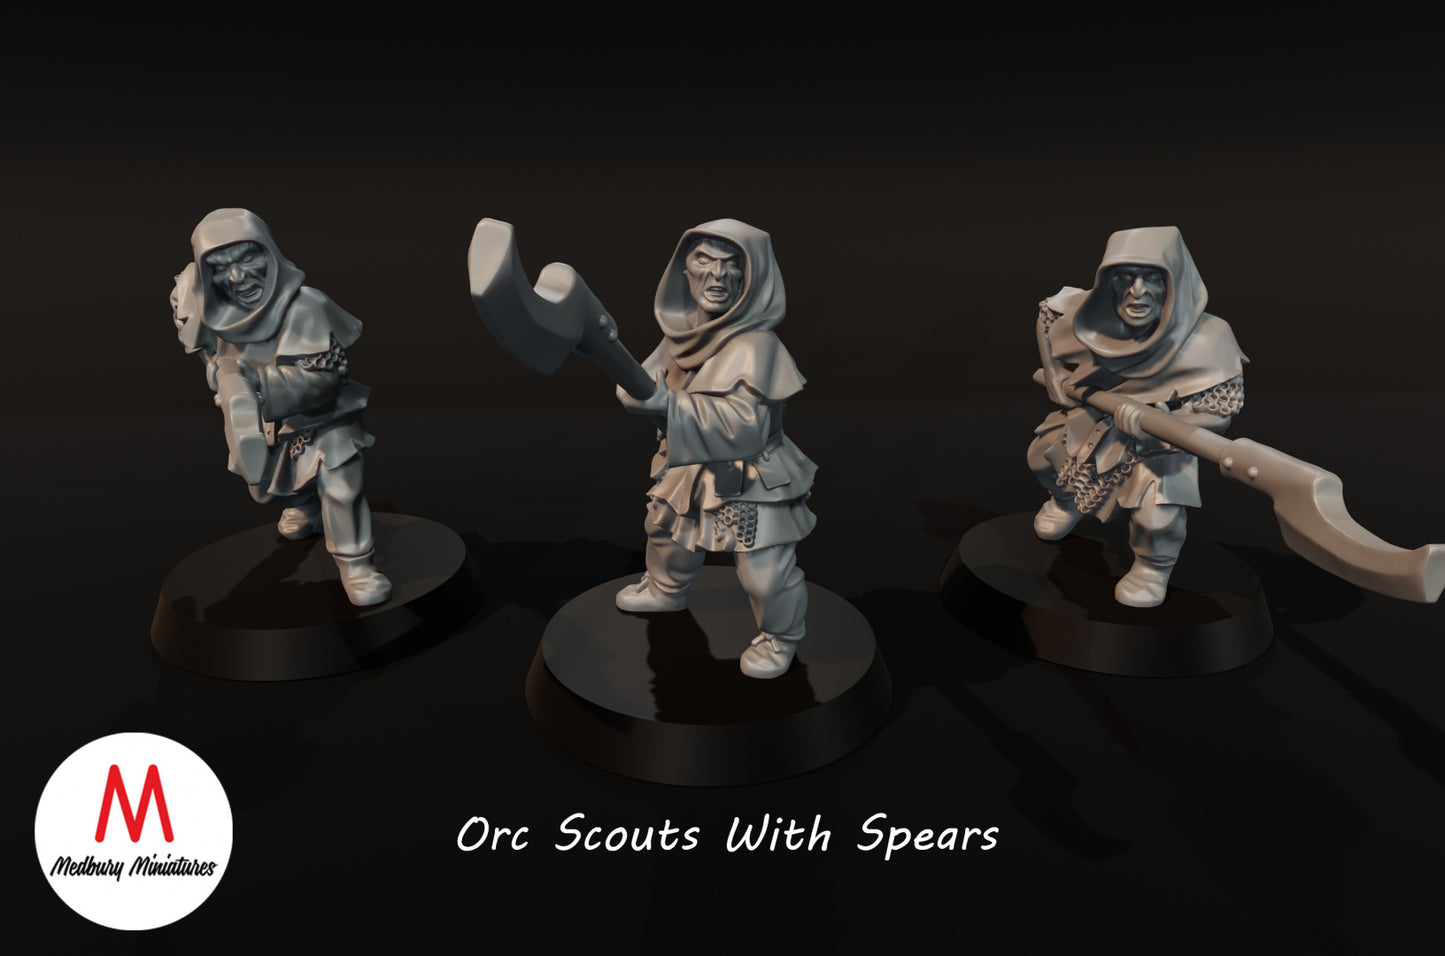 Orc Scouts with spears